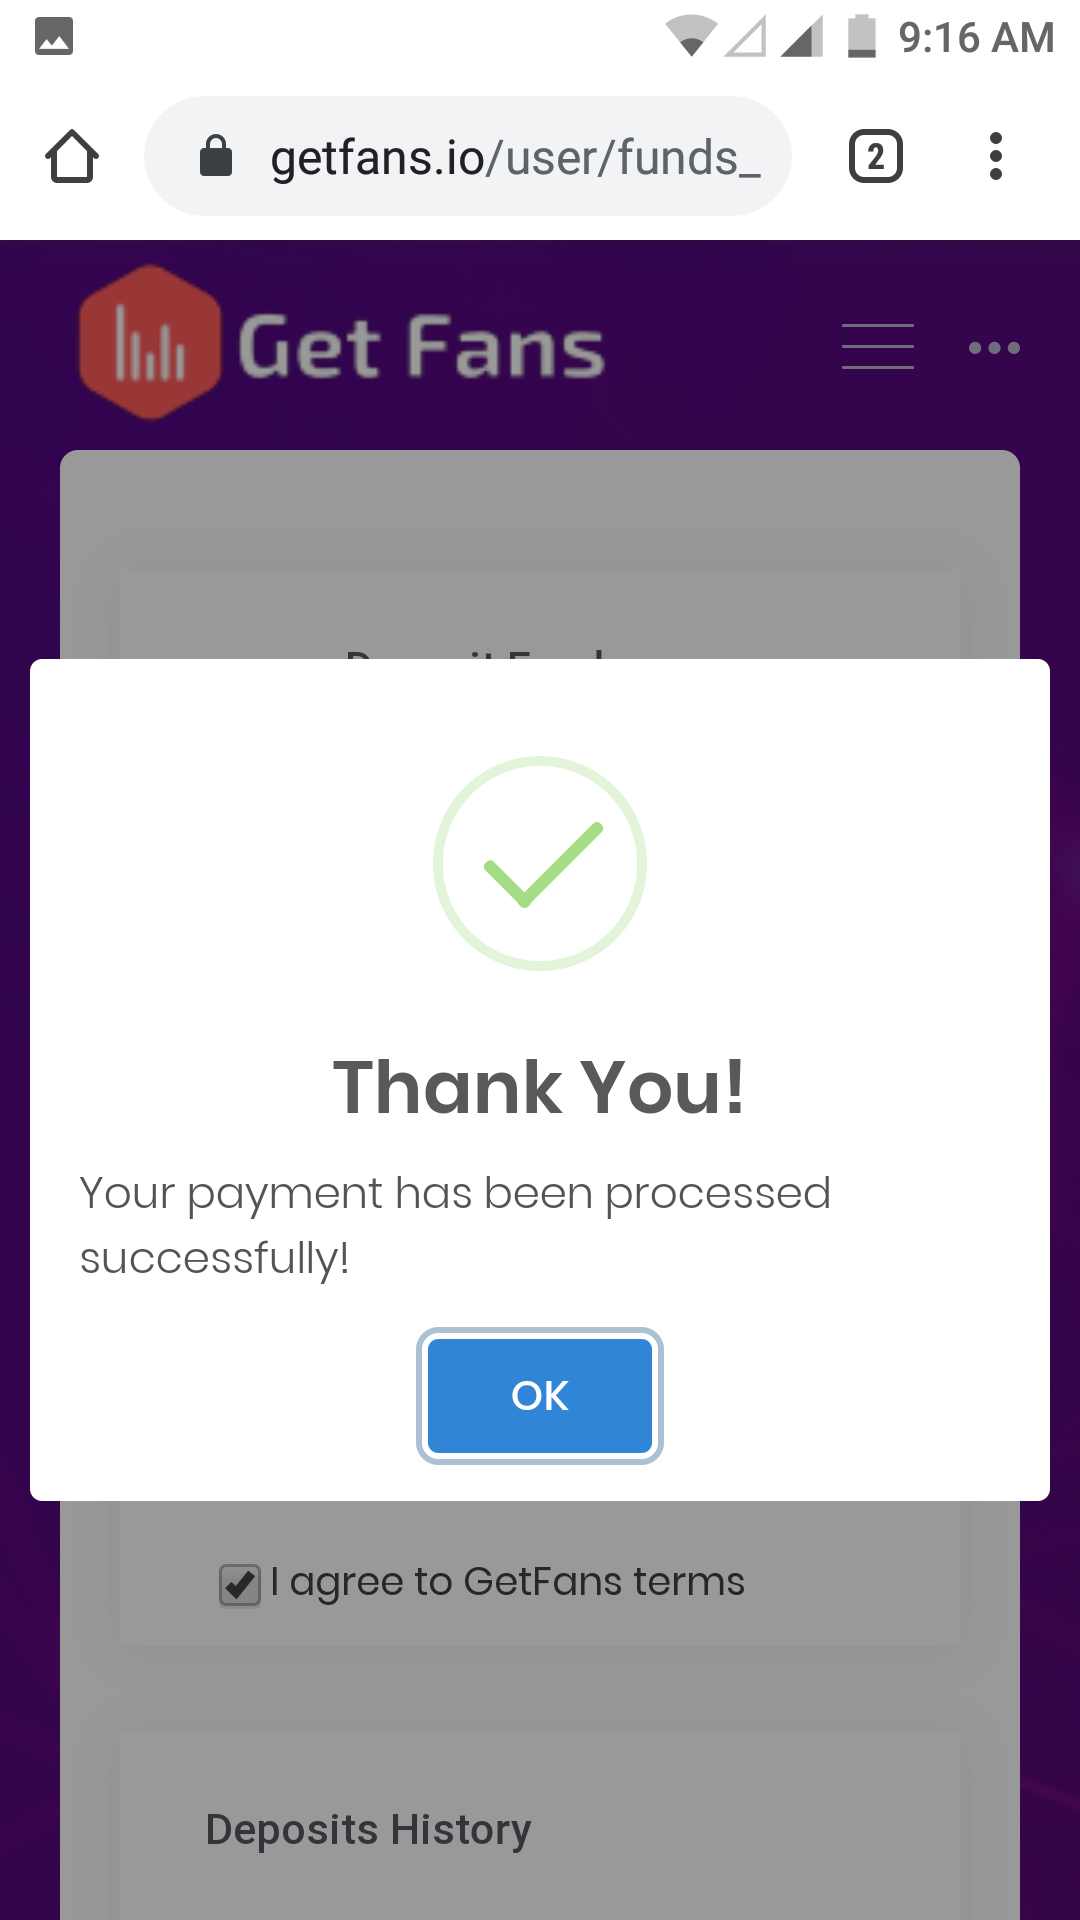 Funds added successfully using PayPal